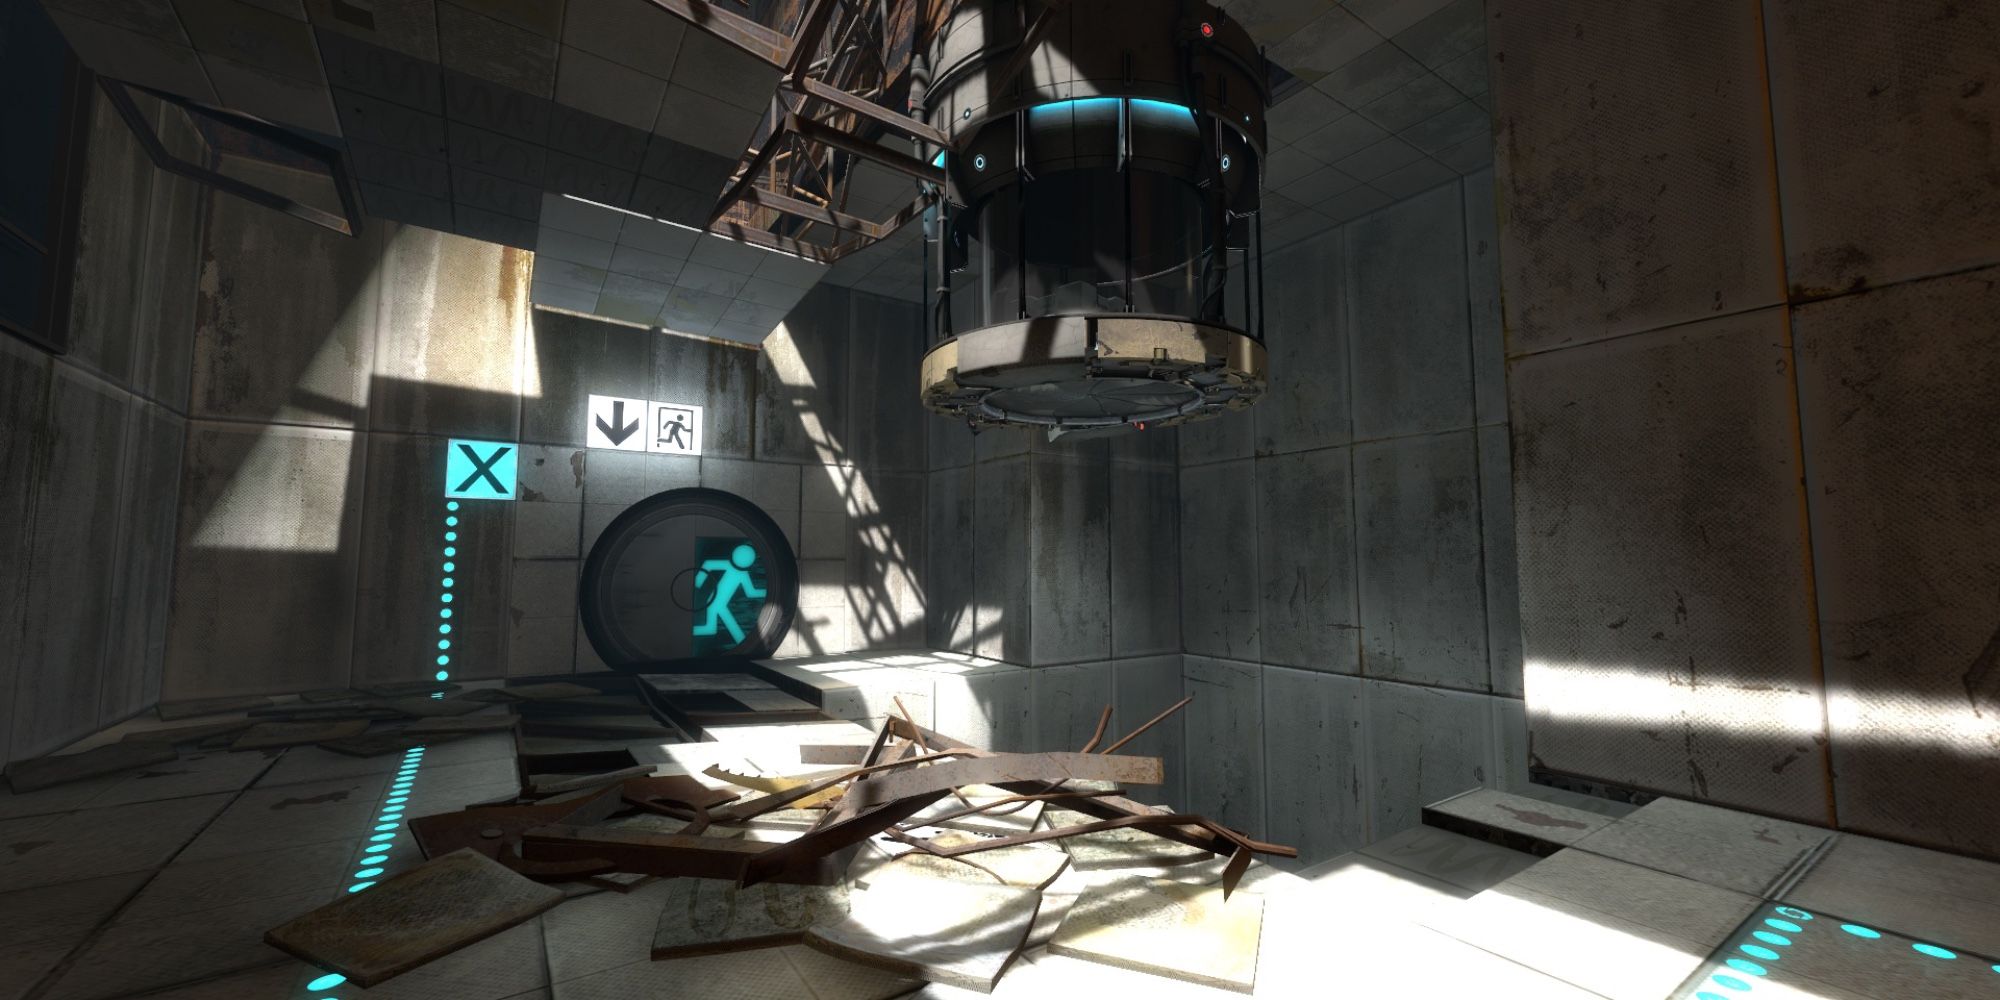 Best Years in Gaming - 2011 - Portal 2 - Player solves puzzles 